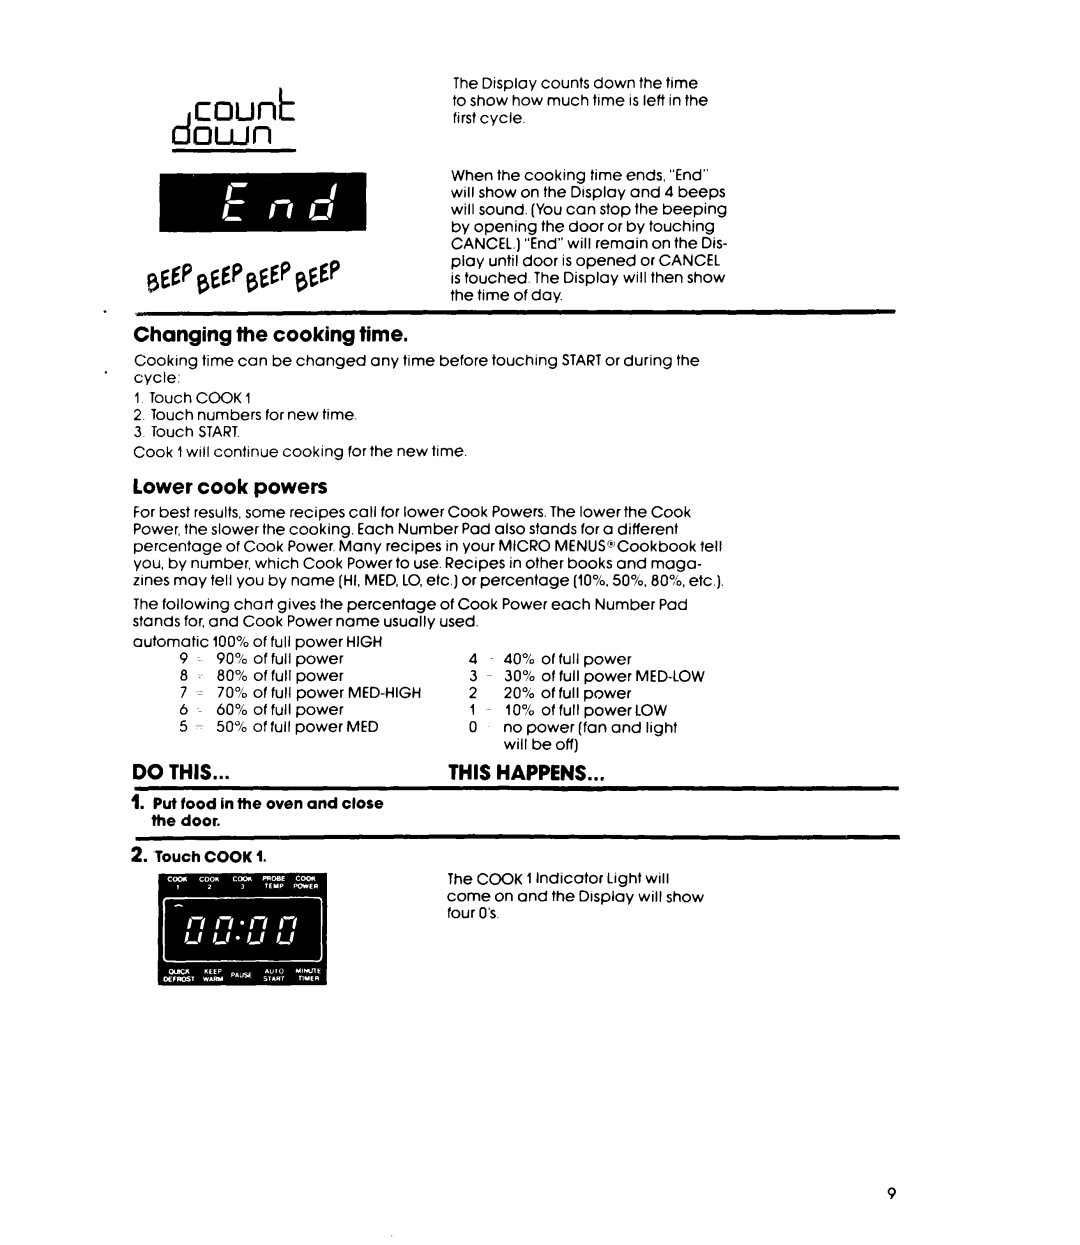 Whirlpool MW88OOXR manual Changing the cooking time, lower cook powers, dl3Wl-l, Do This, This Happens 